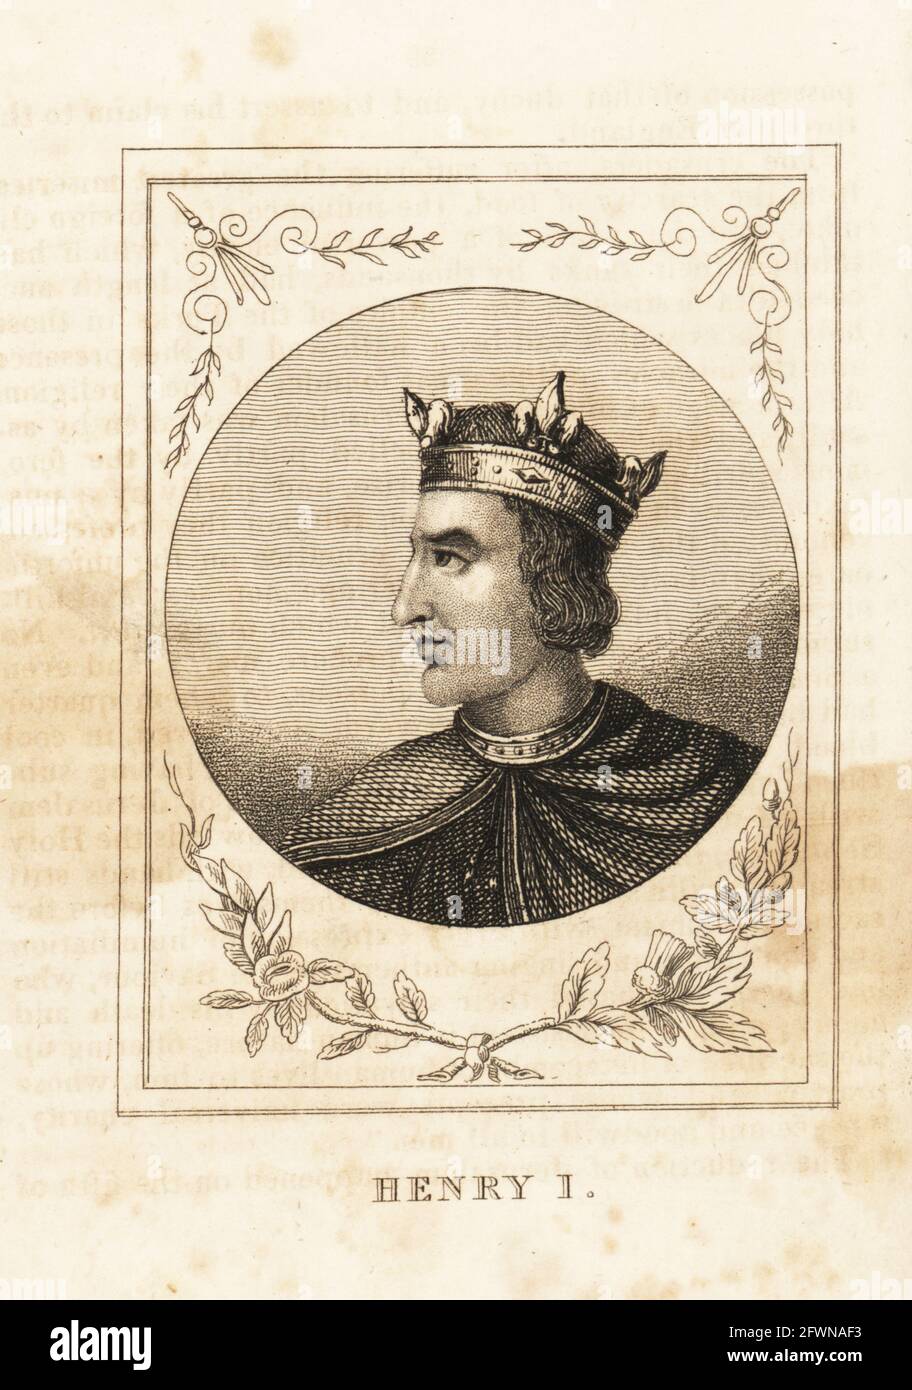 Portrait of Henry I, Henry Beauclerc, King of England, 1068-1135. In crown, collar and mantle. Copperplate engraving from M. A. Jones’ History of England from Julius Caesar to George IV, G. Virtue, 26 Ivy Lane, London, 1836. Stock Photo